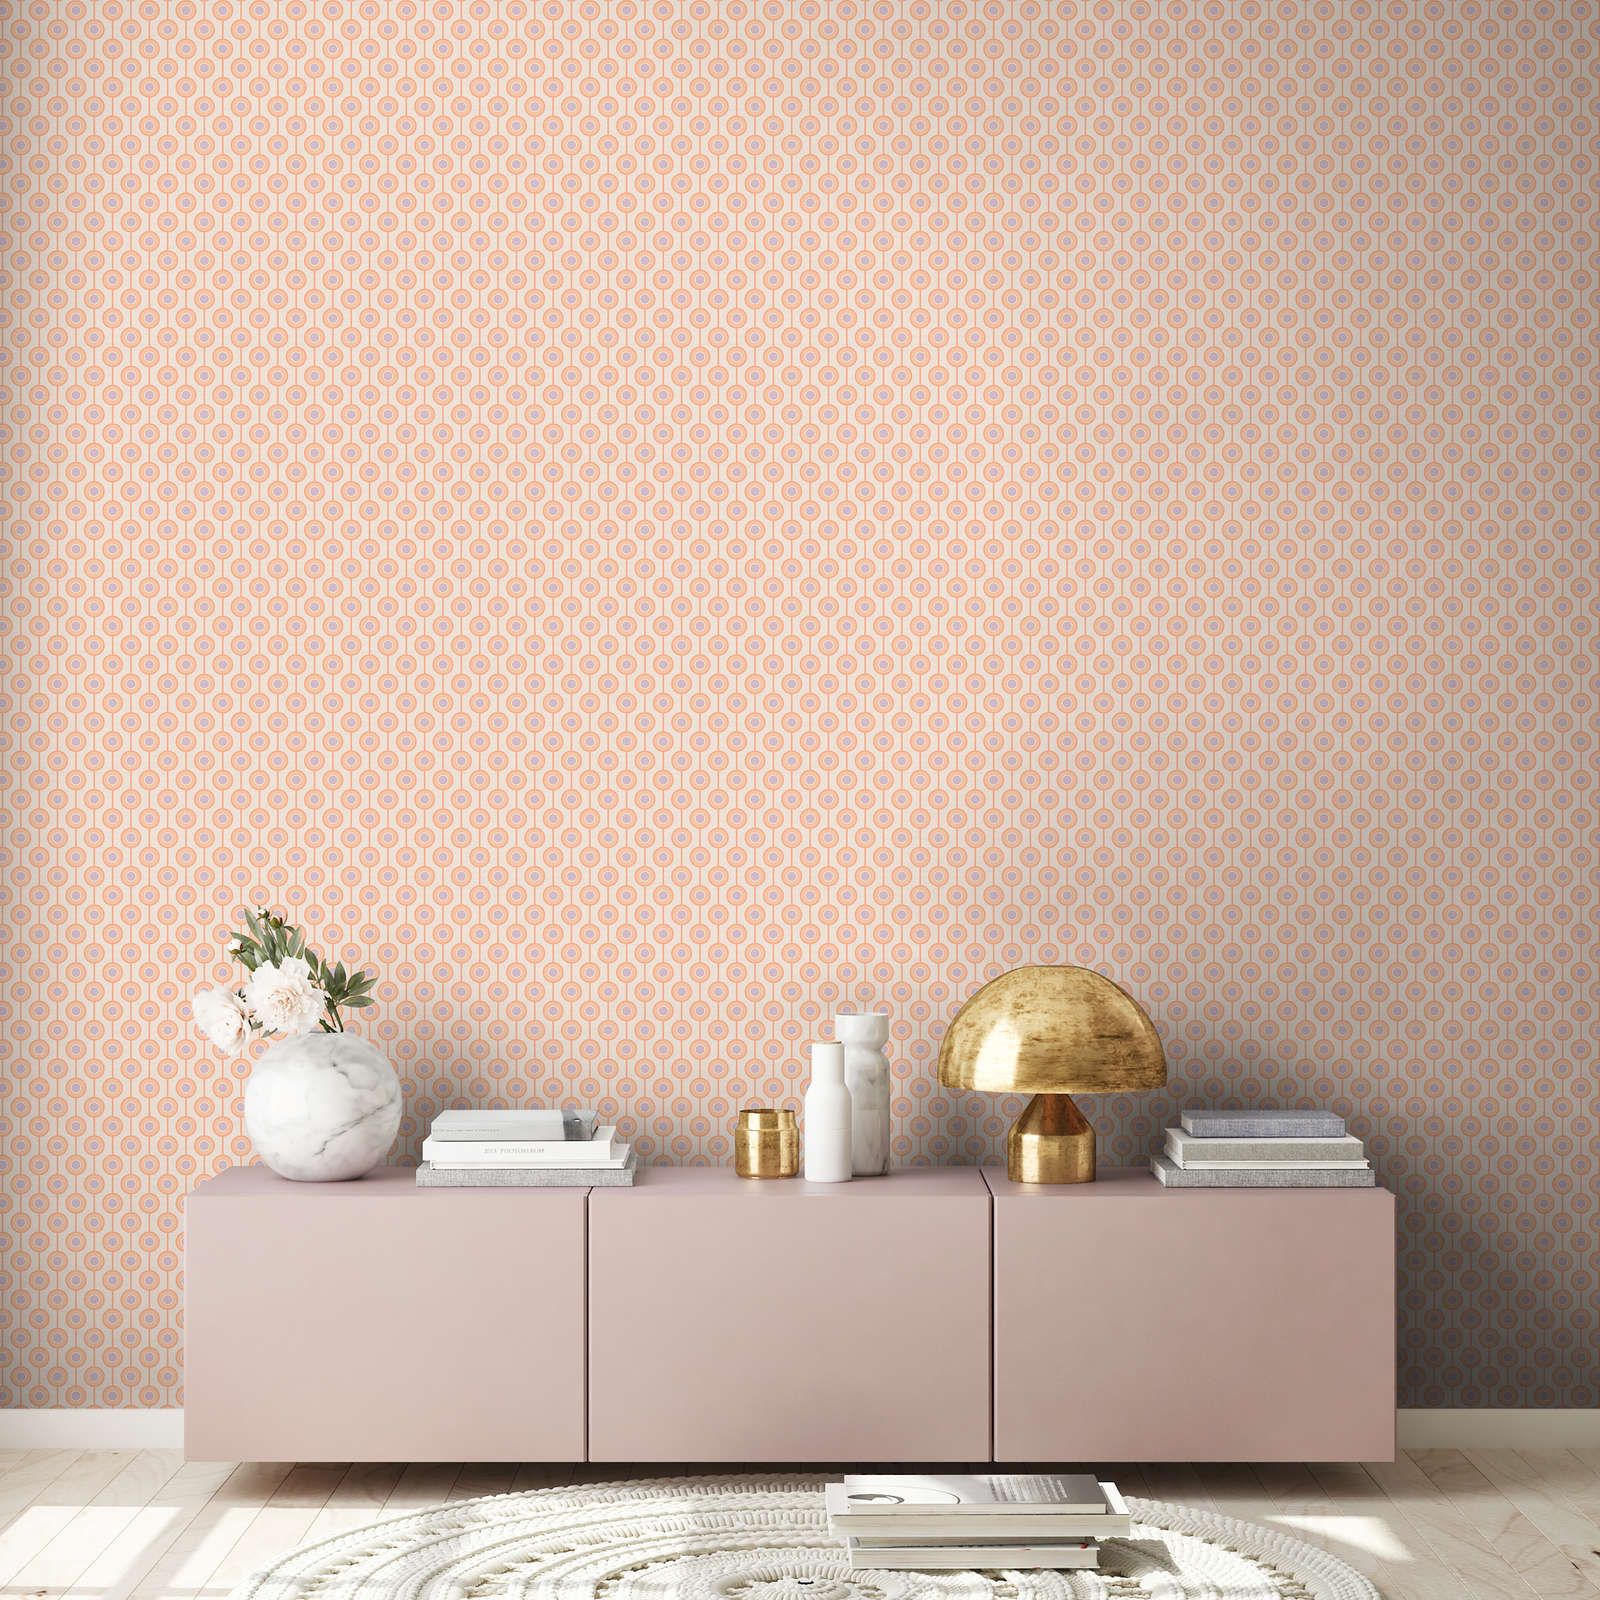             Non-woven wallpaper with circle pattern in soft colours - beige, orange, purple
        